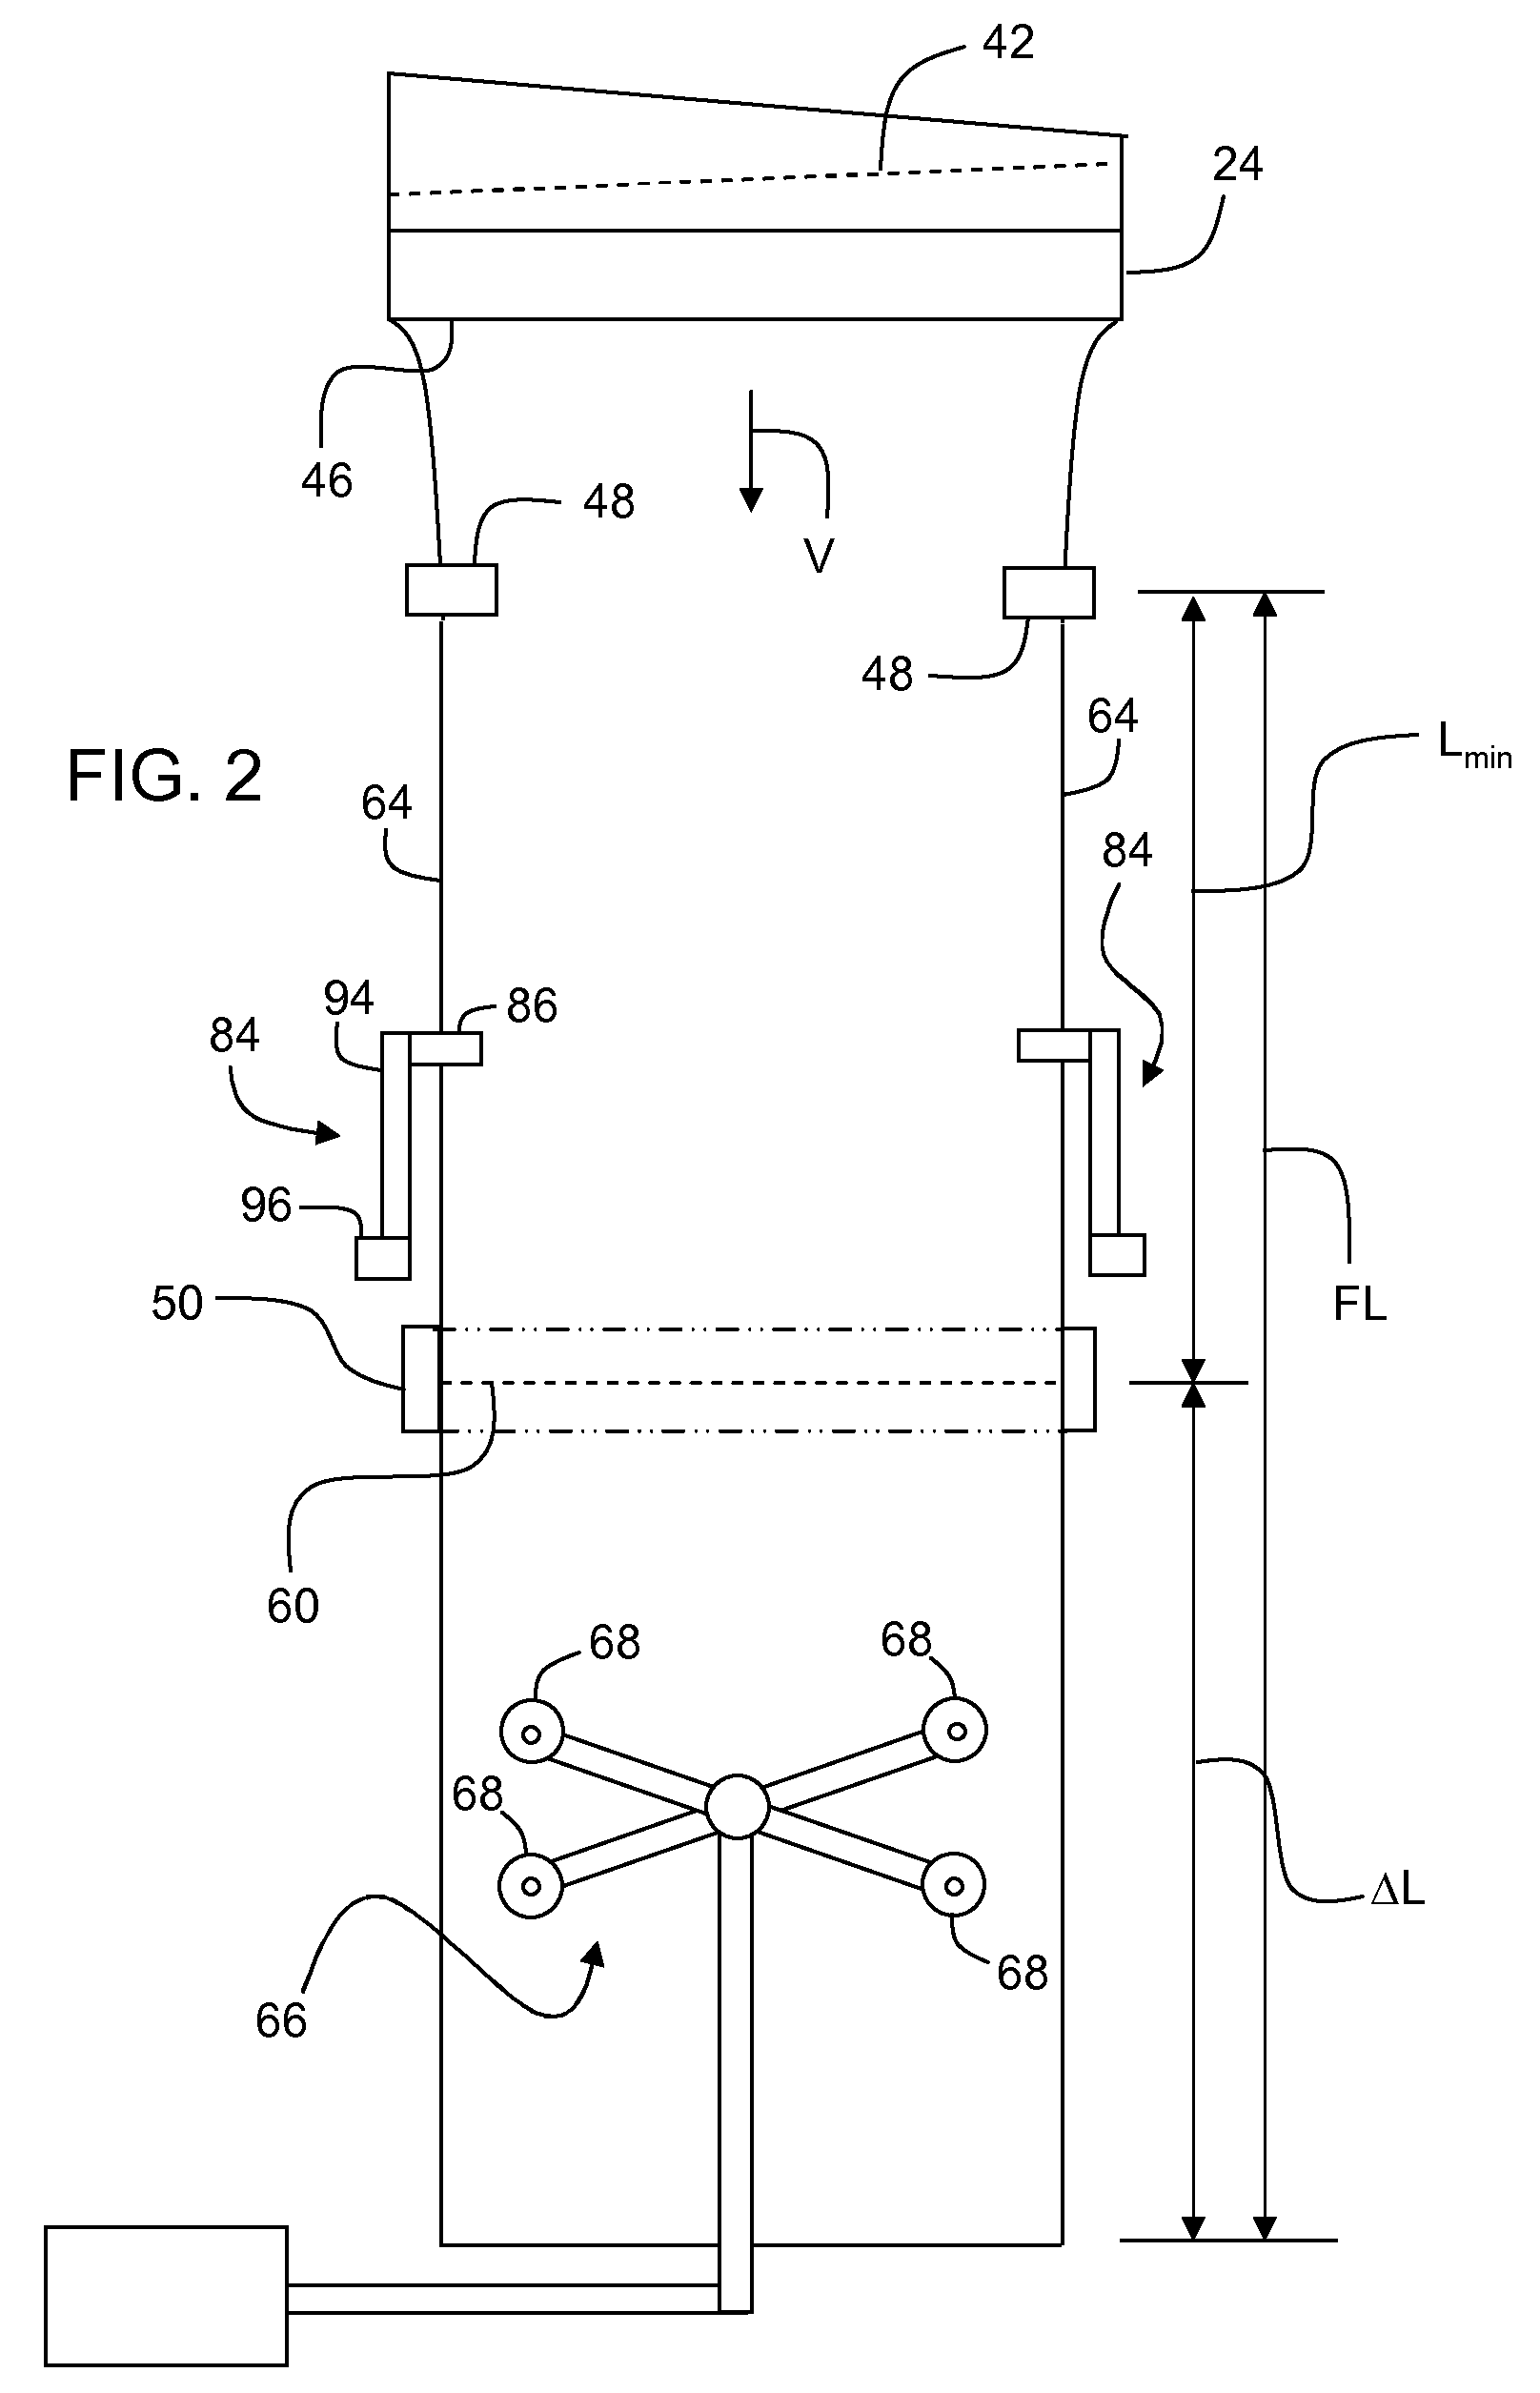 Apparatus and method for separating a glass sheet from a moving ribbon of glass